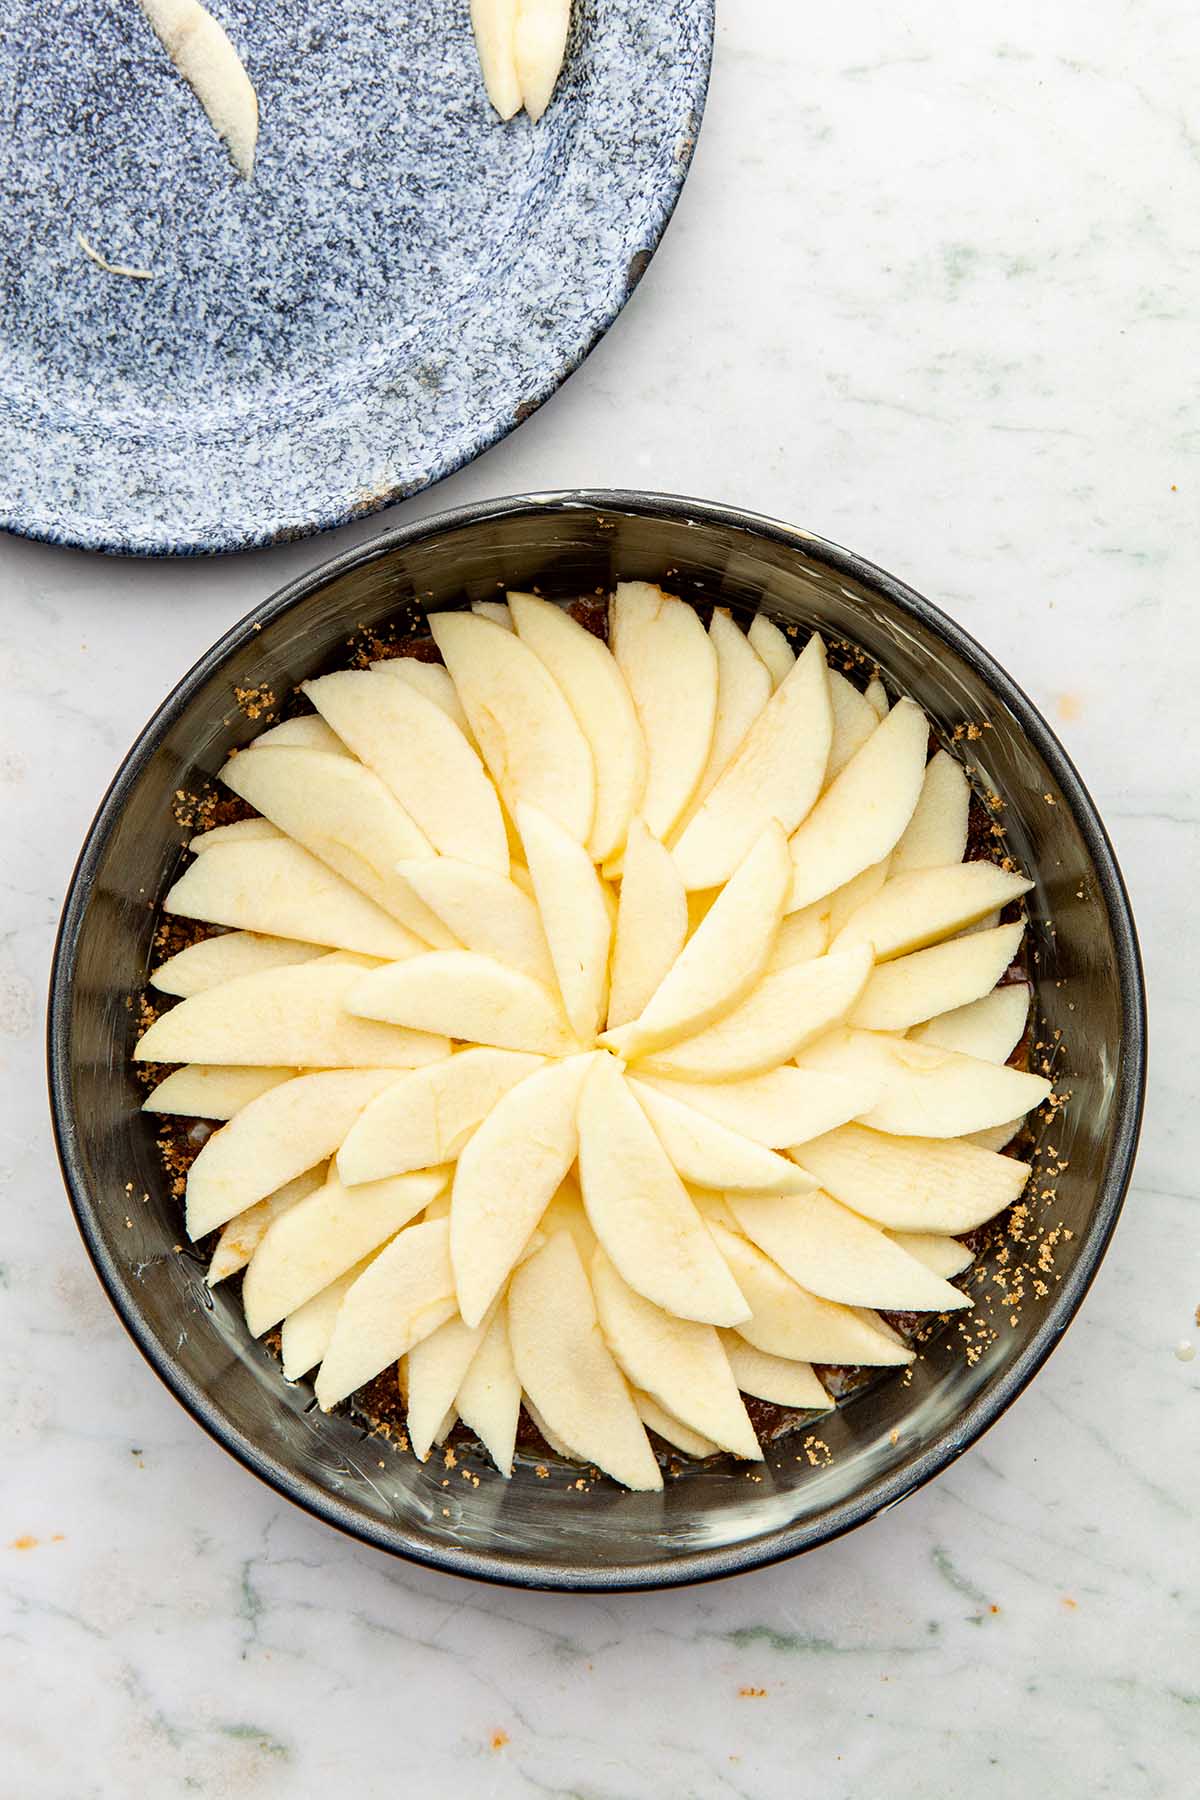 Apple slices arranged in a circular pattern inside a cake tin.